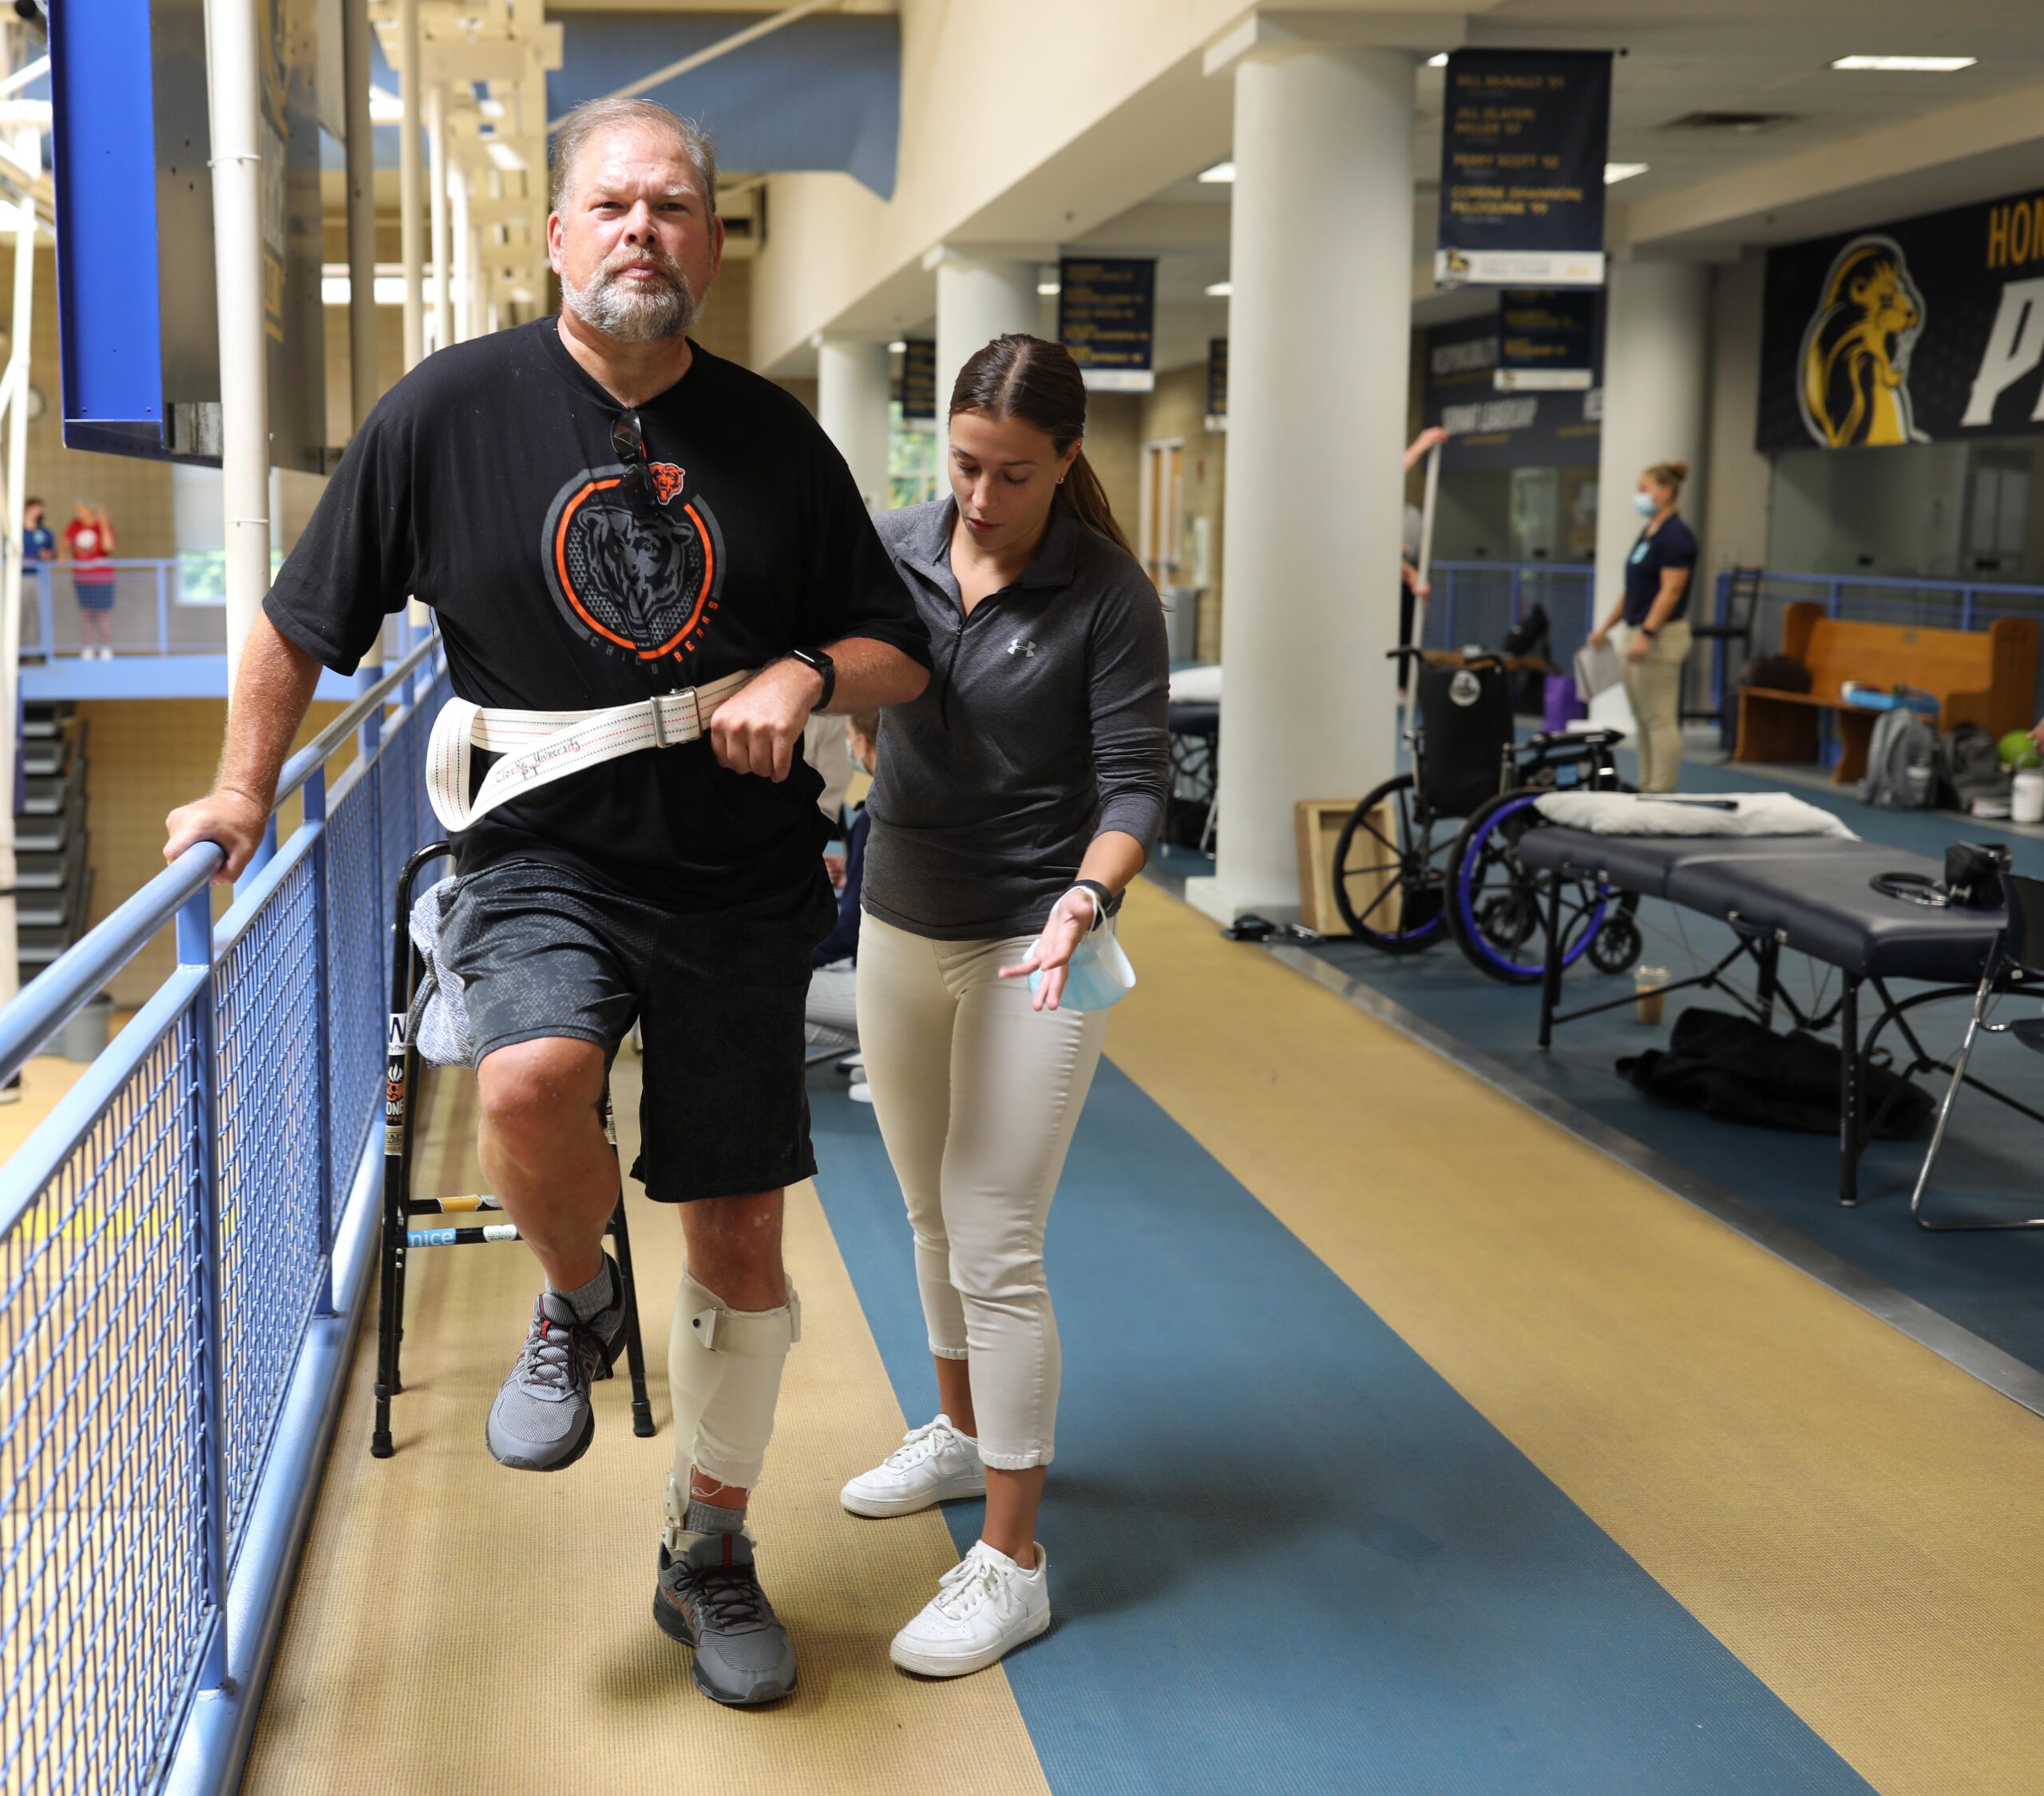 Clarke University Doctor of Physical Therapy working on patient.